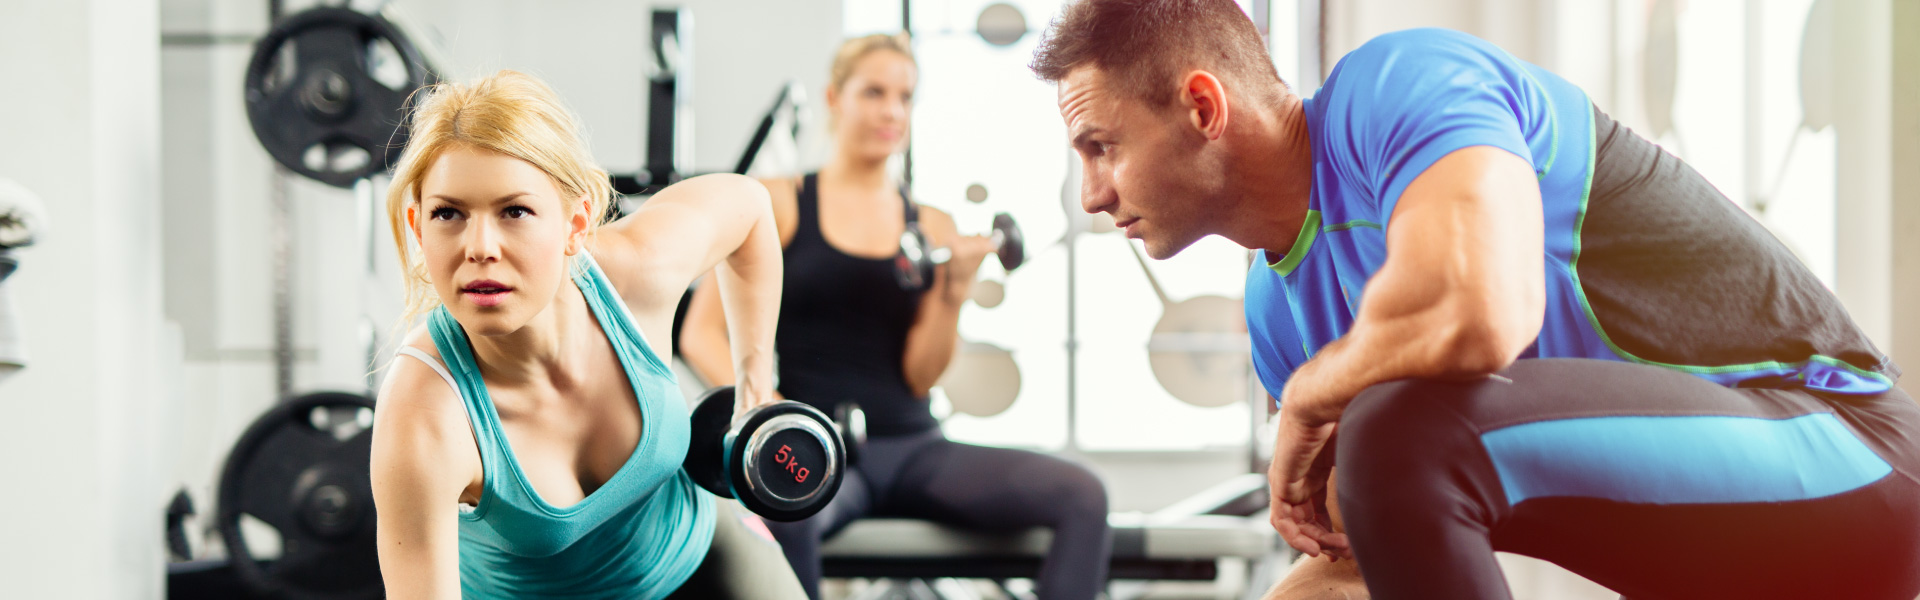 Choosing A Workout Partner To Keep You Motivated